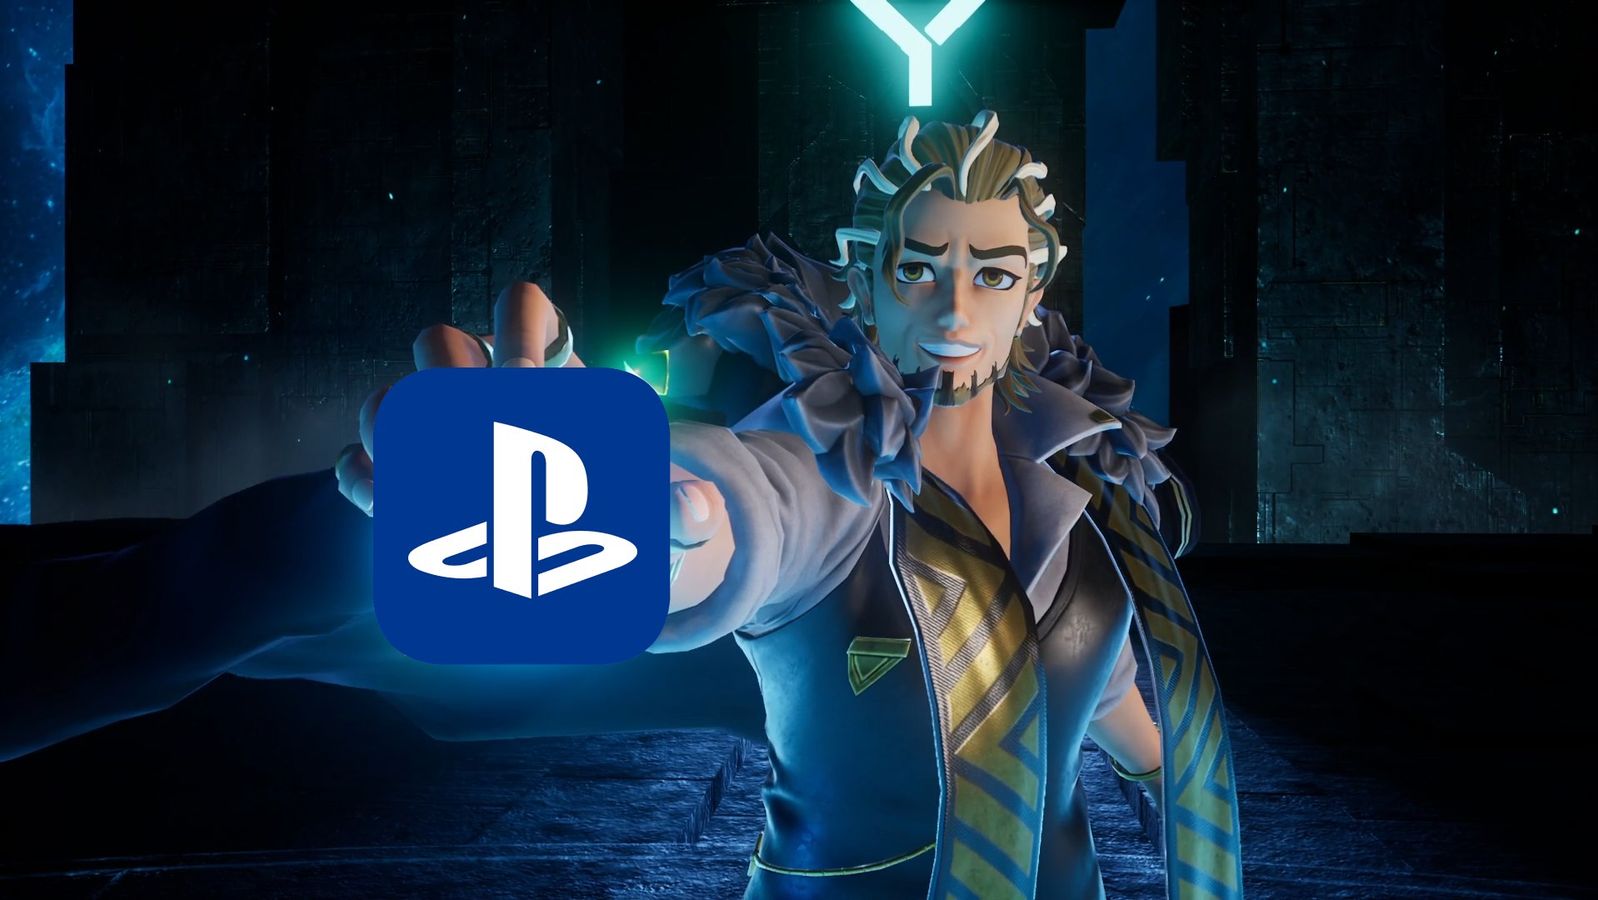 palworld boss holding playstation icon in right hand smiling